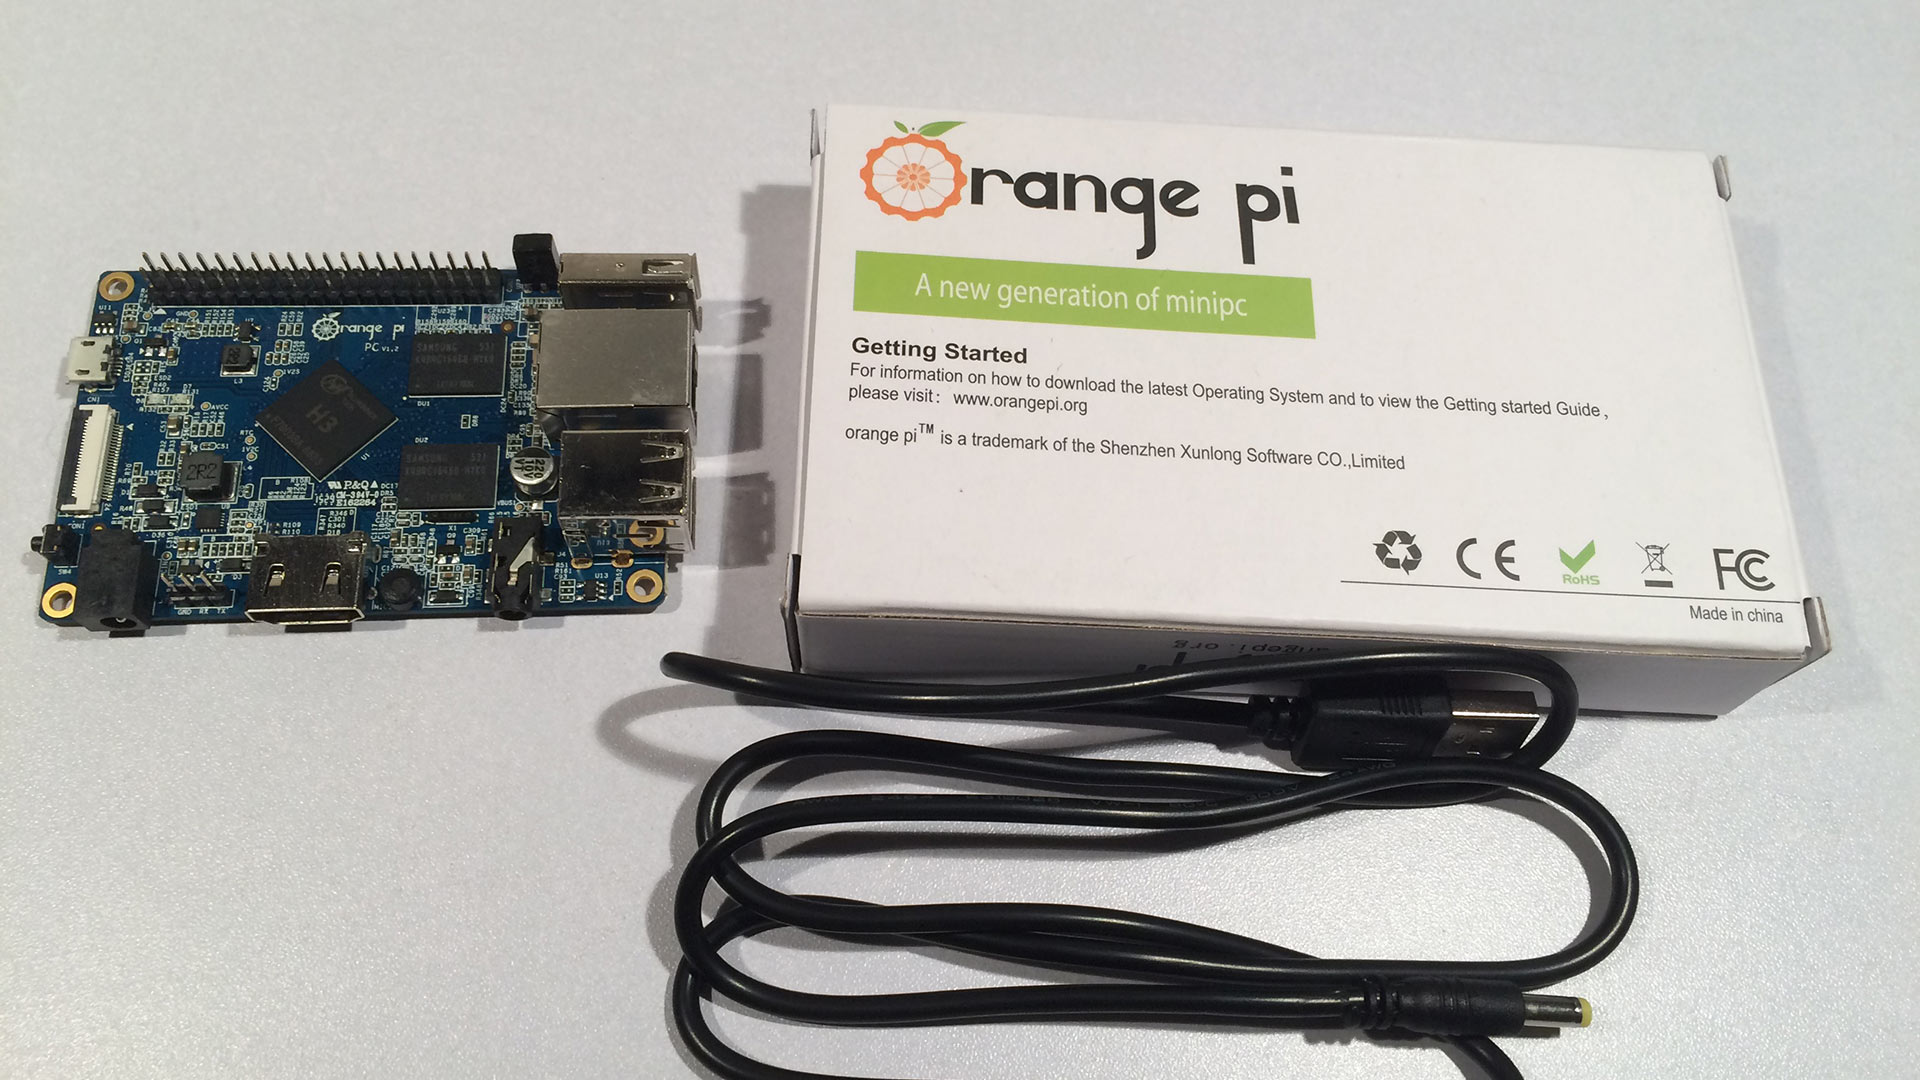 The Orange Pi Out of its box.